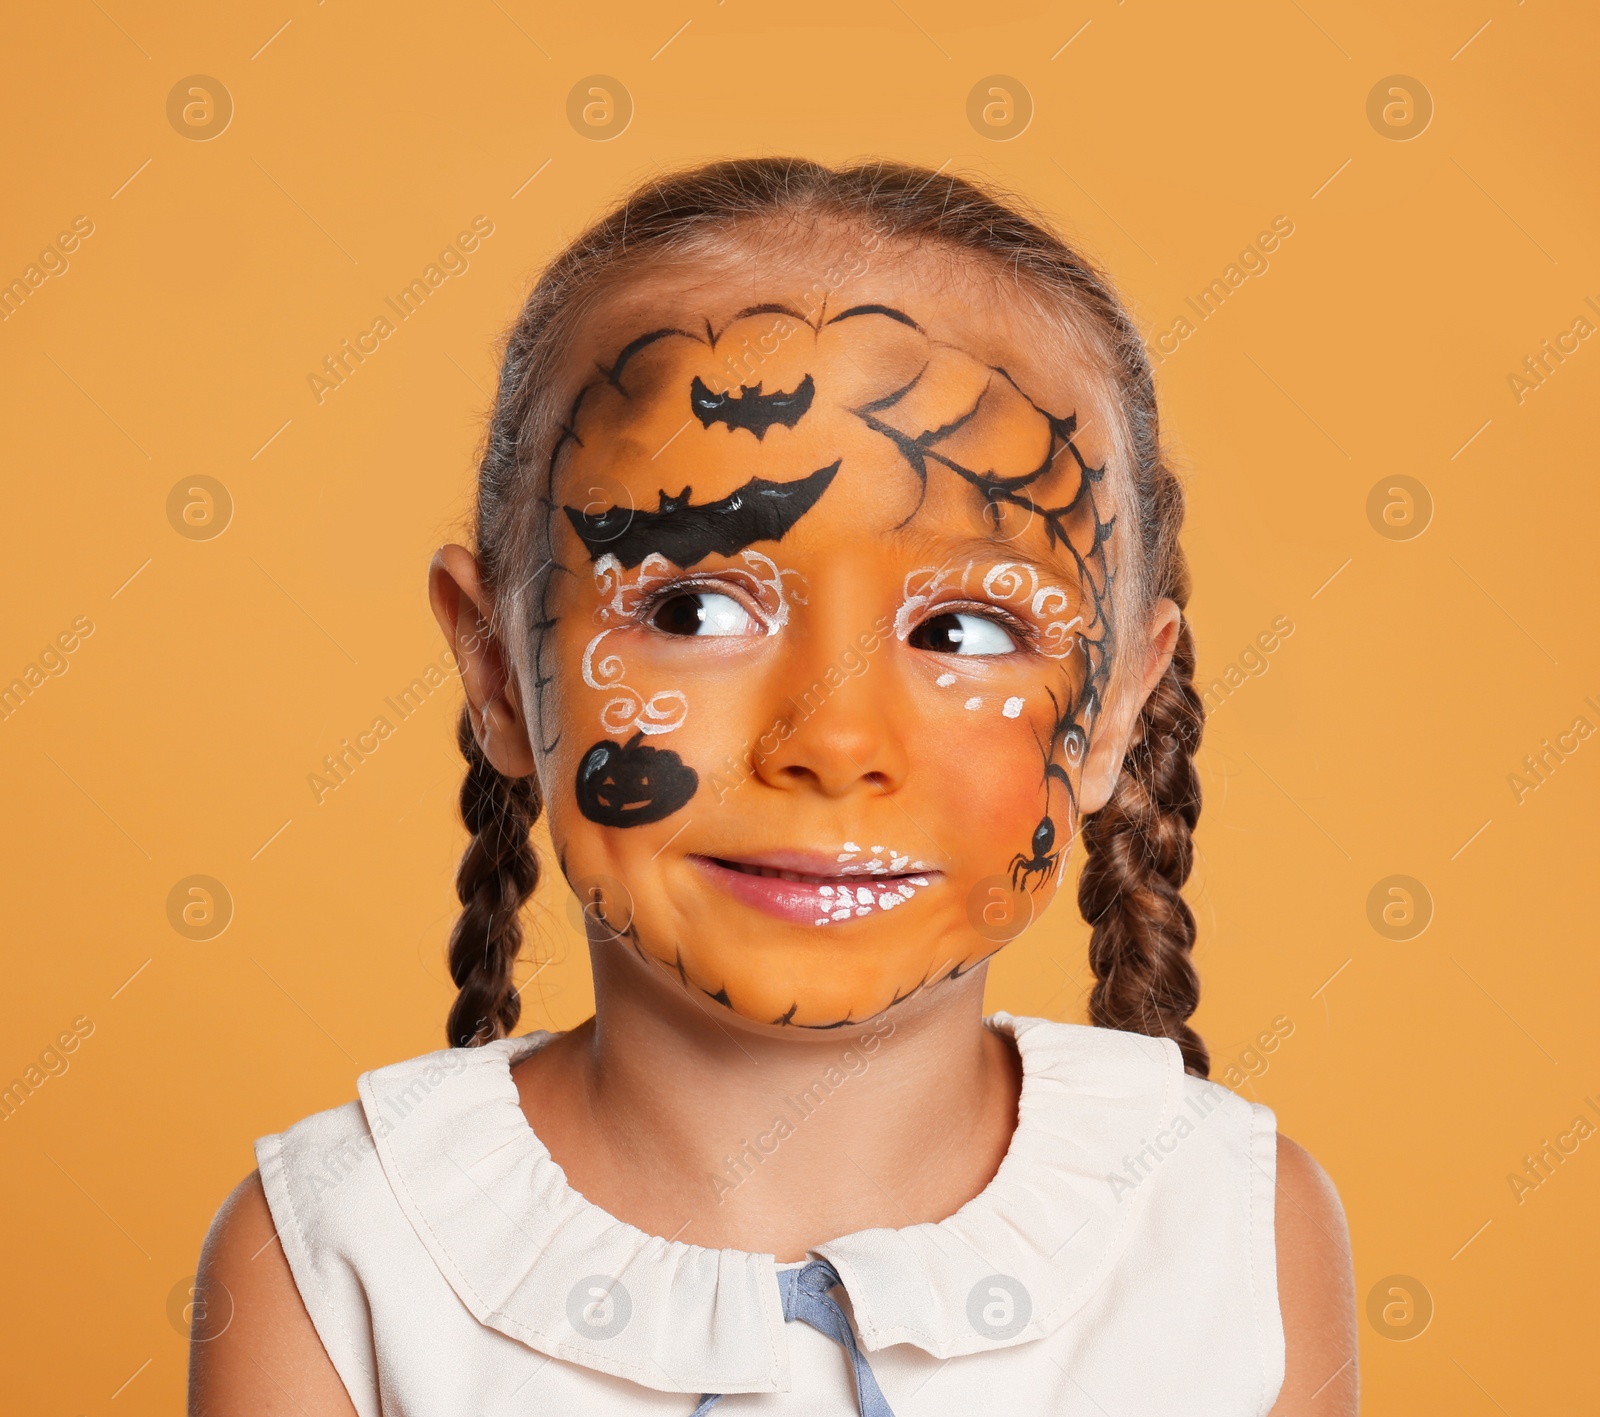 Photo of Cute little girl with face painting on orange background